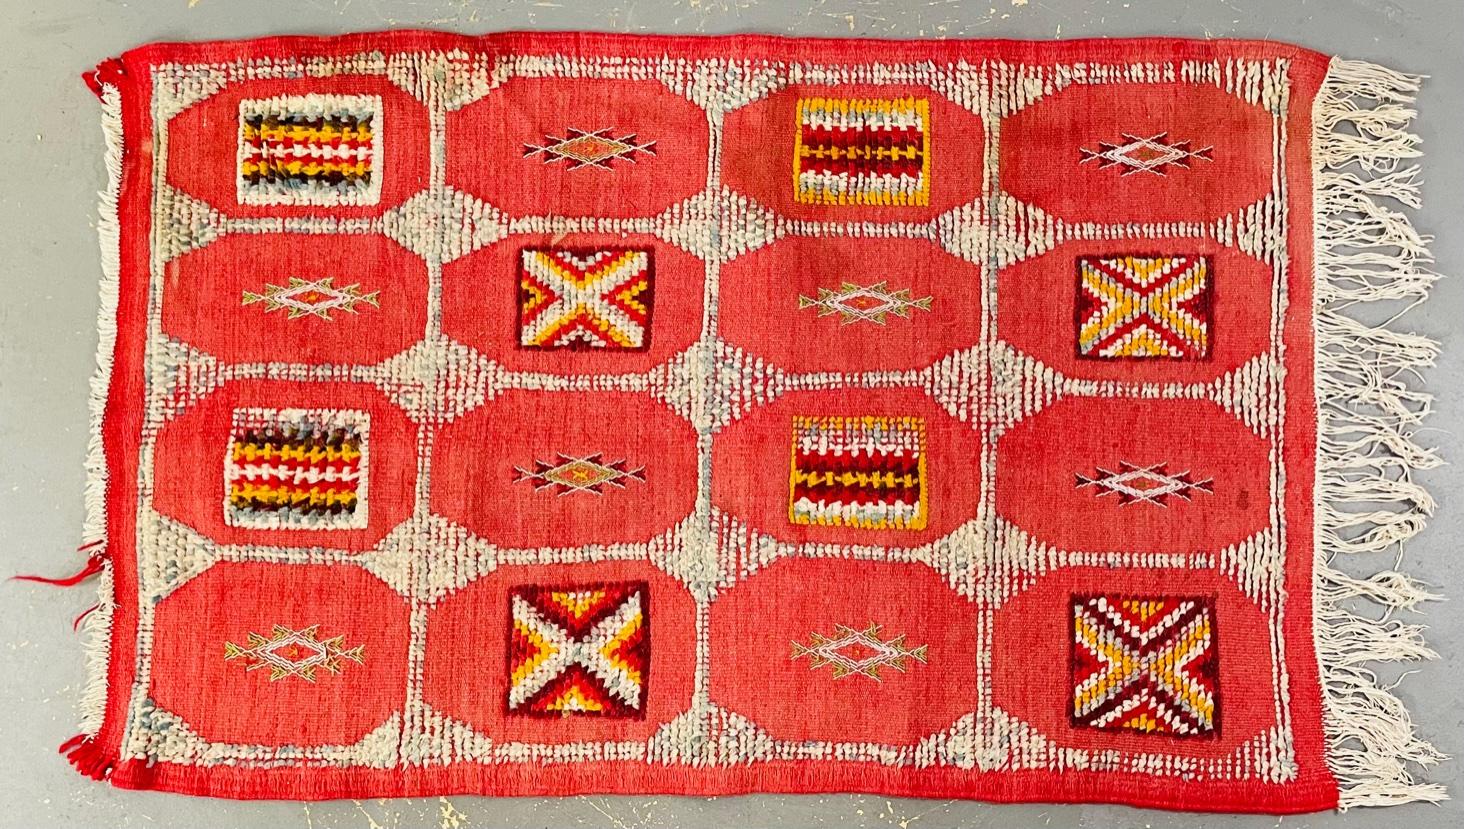 A vintage tribal Berber Moroccan hand-woven area rug or carpet in a flatware style. The rug features panels containing Berber tribal symbols and it is handmade using sheep wool and organic natural dyes. 
The rug aged gracefully as the red /pink